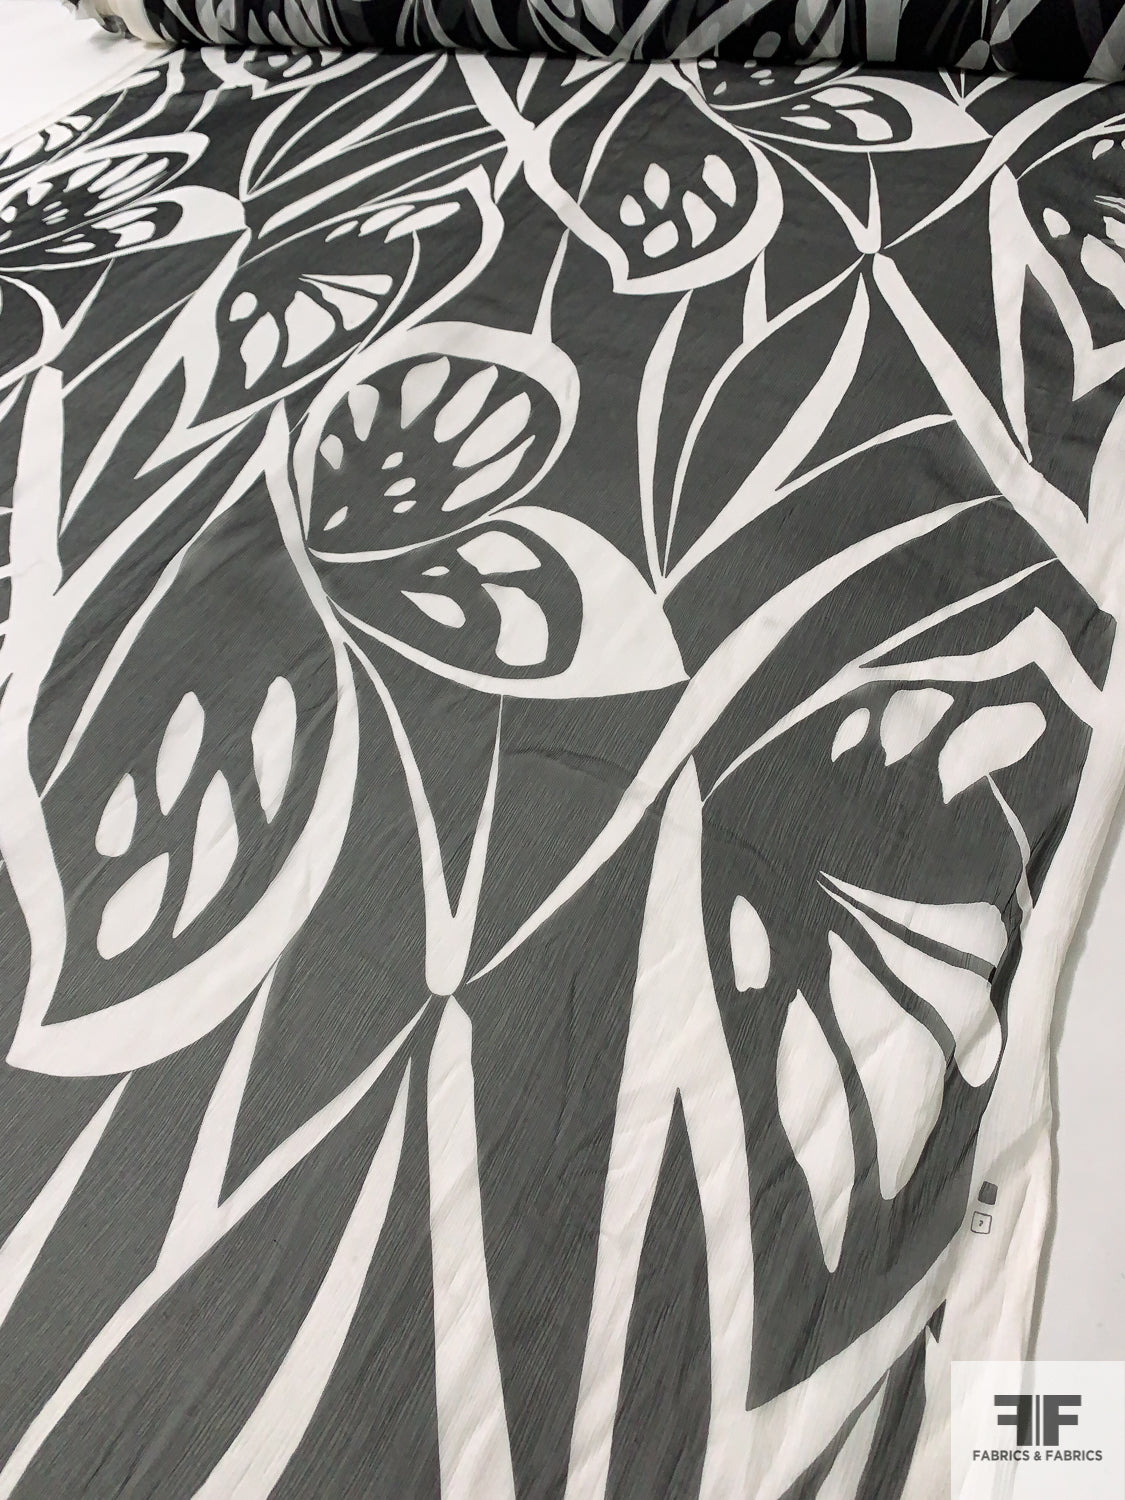 Italian Oversize Floral Graphic Printed Crinkled Silk Chiffon - Black / White